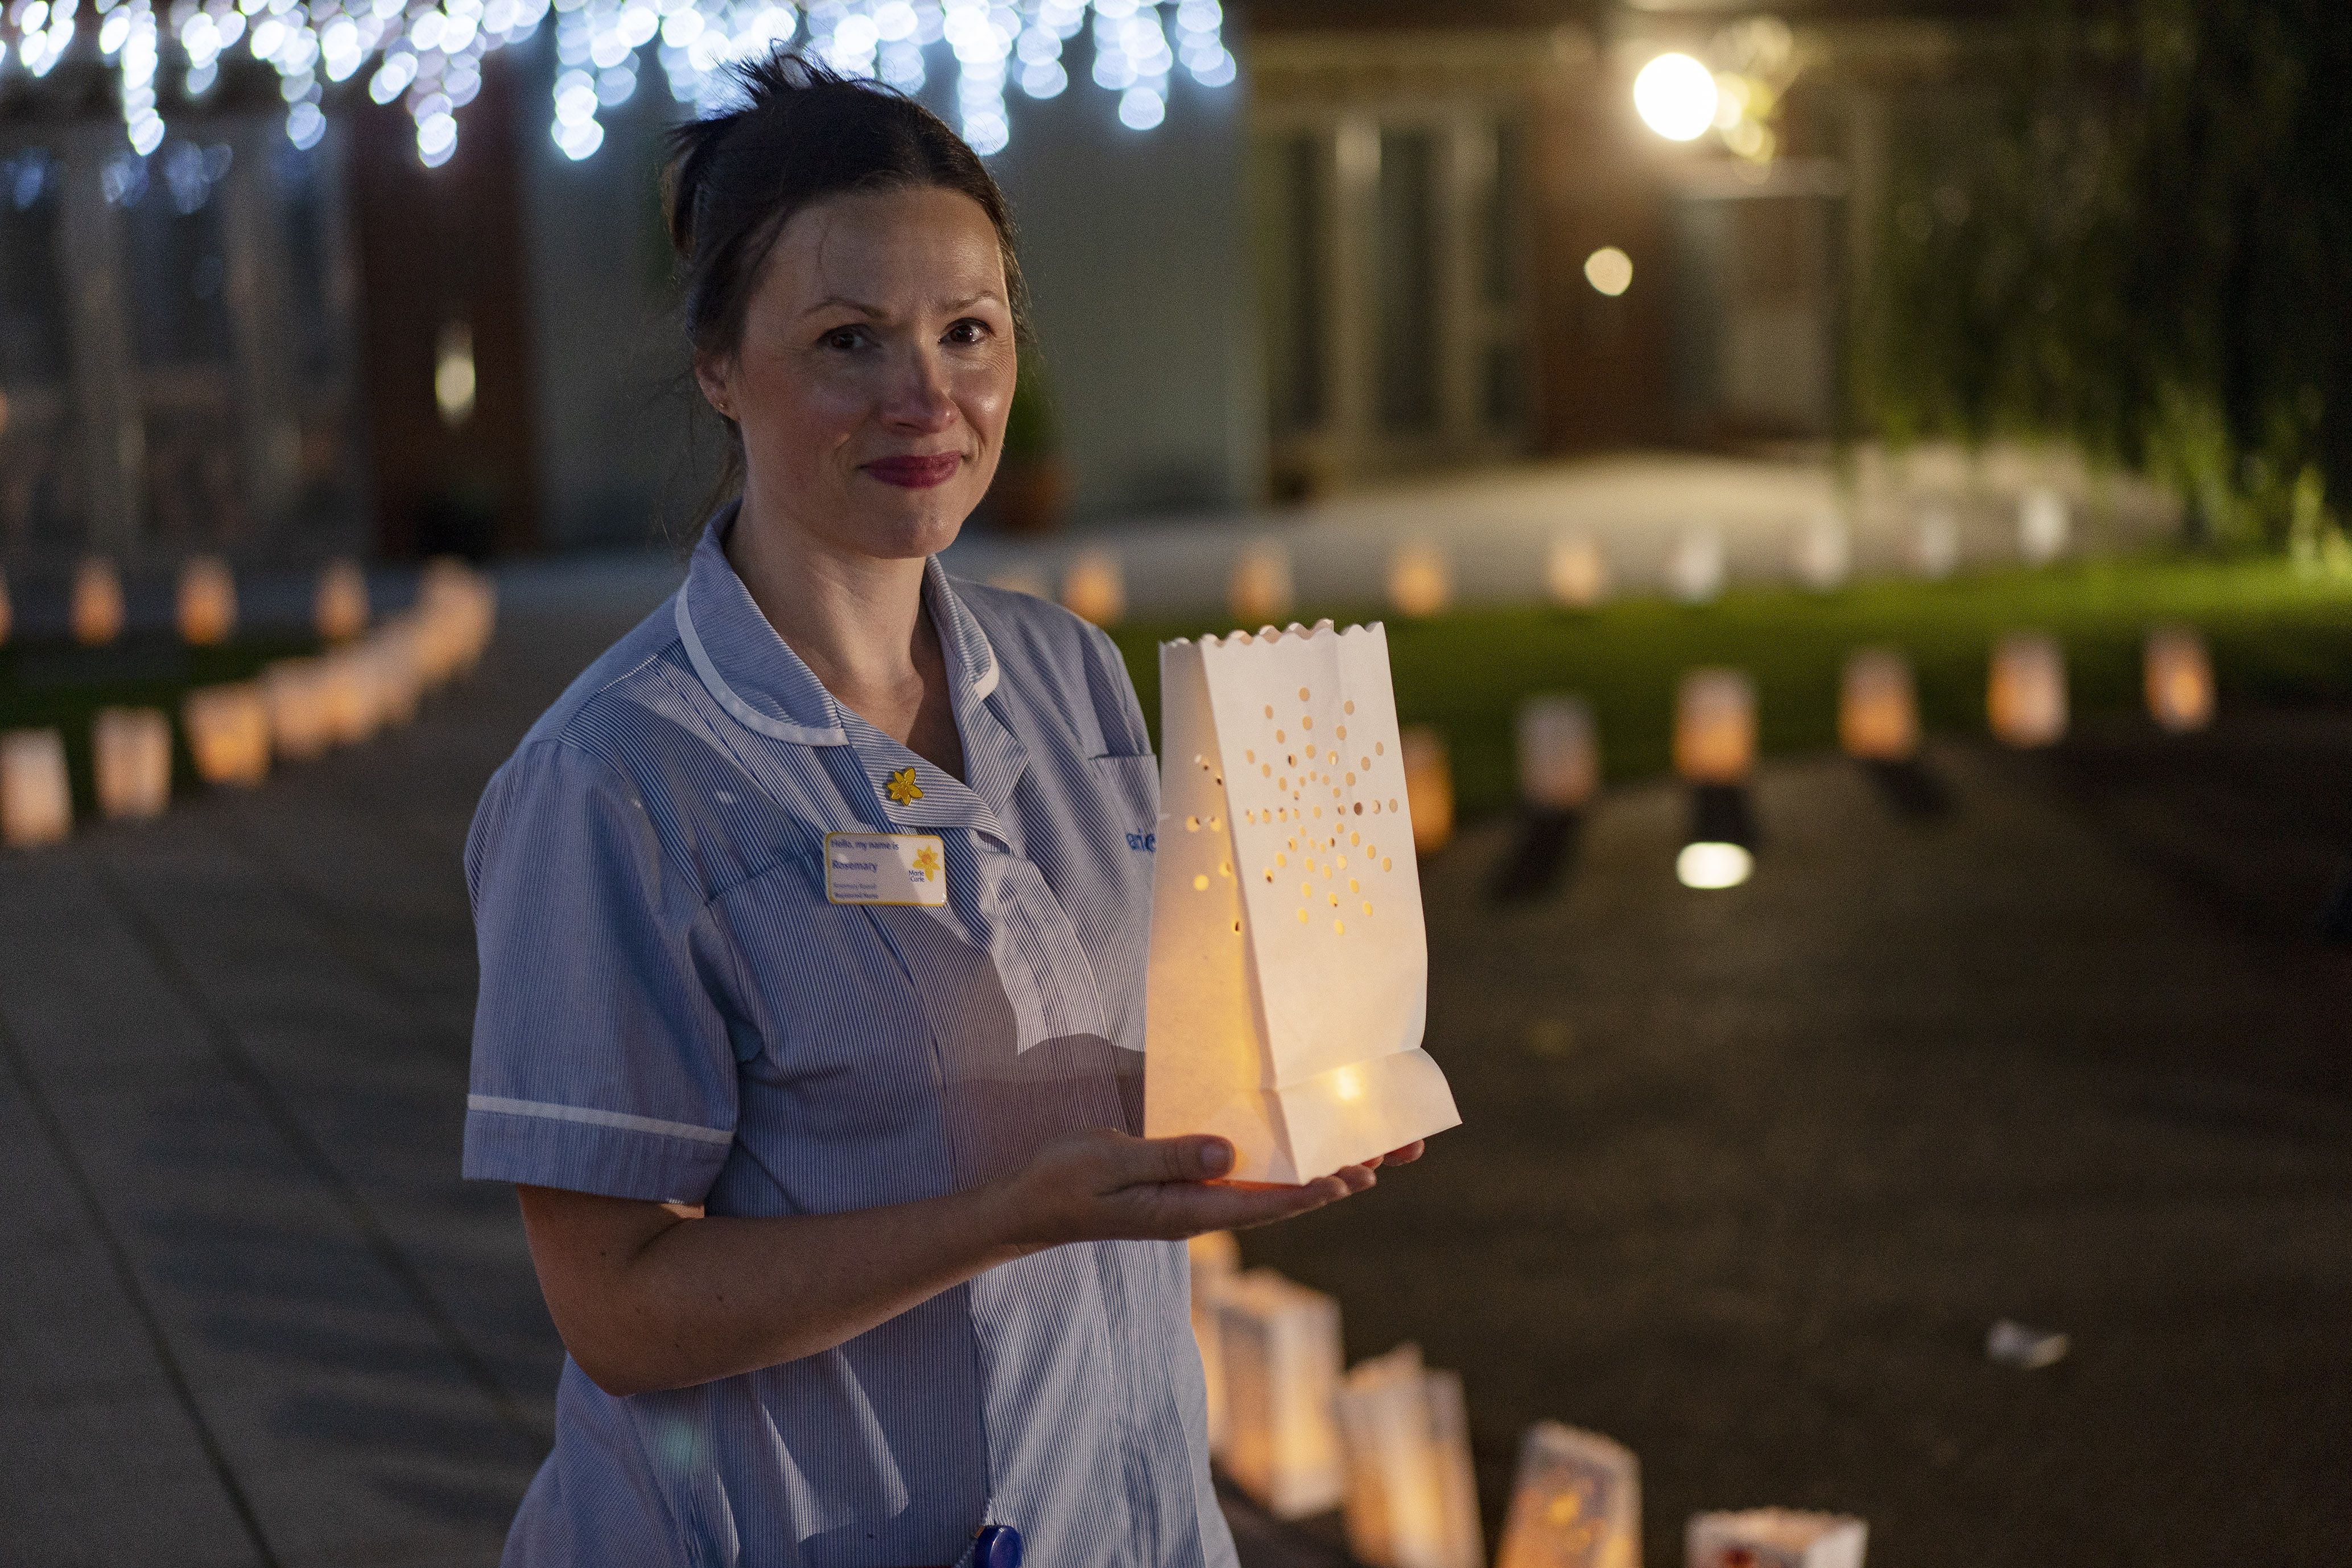 A woman in a nurses outfit holding a lantern, with a row of lanterns behind her lighting a pathway.